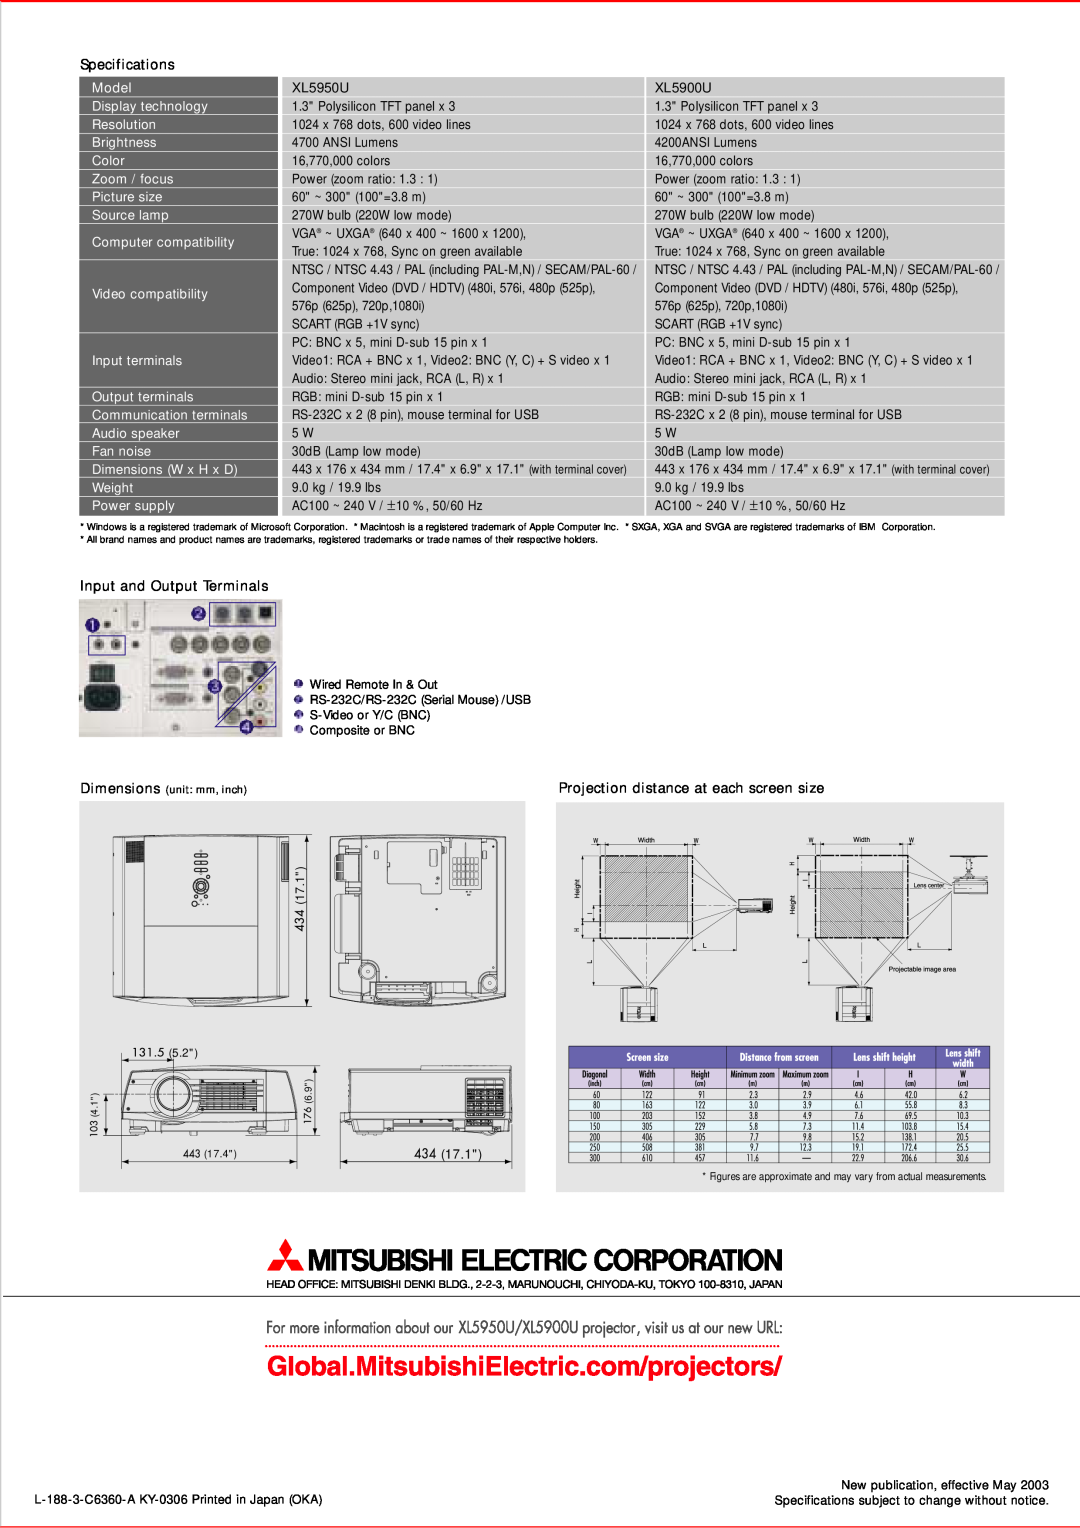 Mitsubishi Electronics XL5950U Specifications, Input and Output Terminals, Projection distance at each screen size, Model 